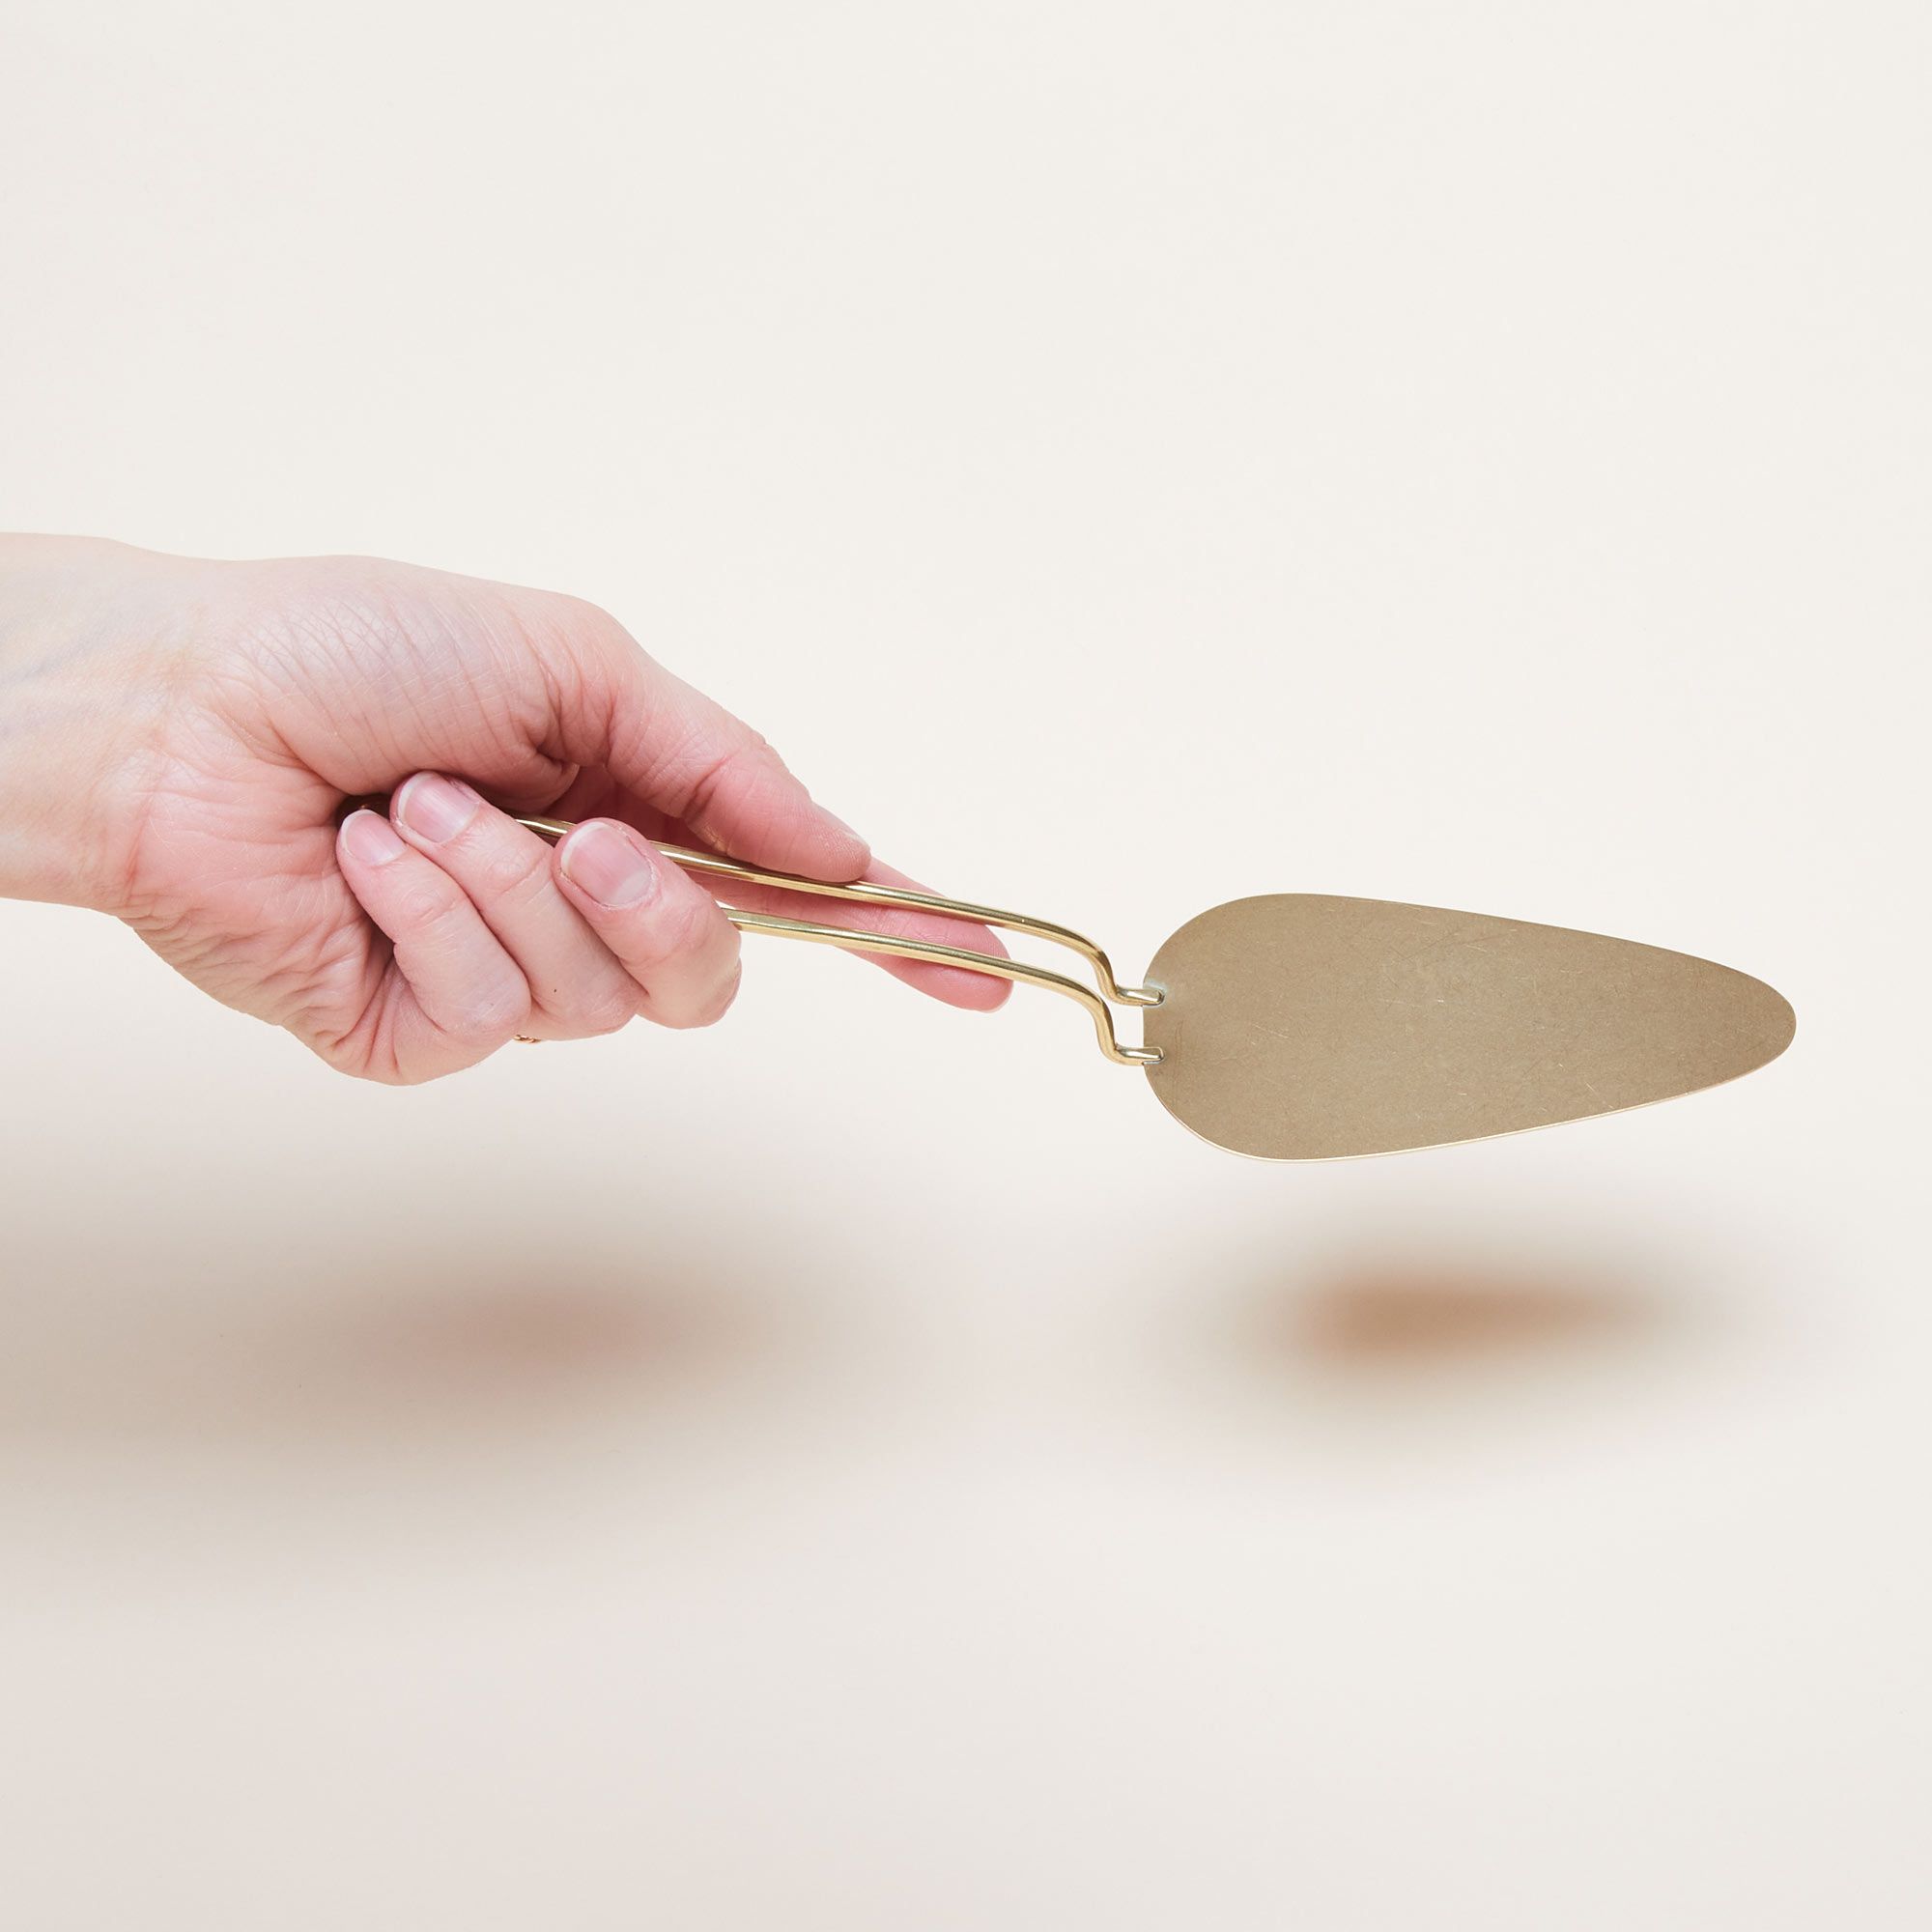 A hand holds a brass pie server that has a triangular part for lifting